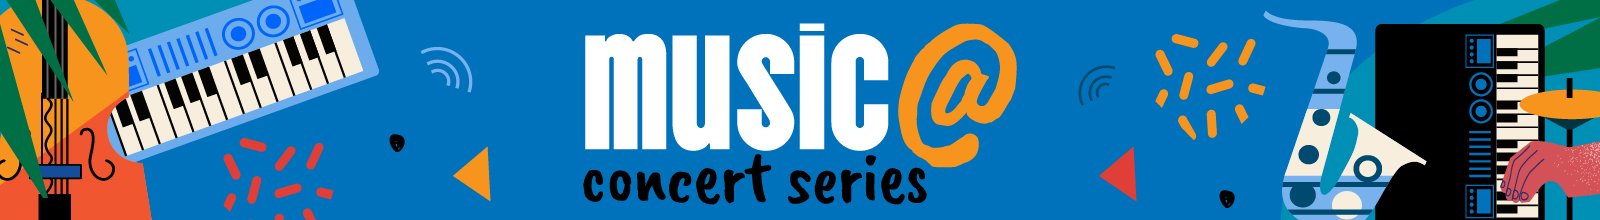 stylized, illustrated instruments and music notes on a blue background with text; Music @ Concert Series